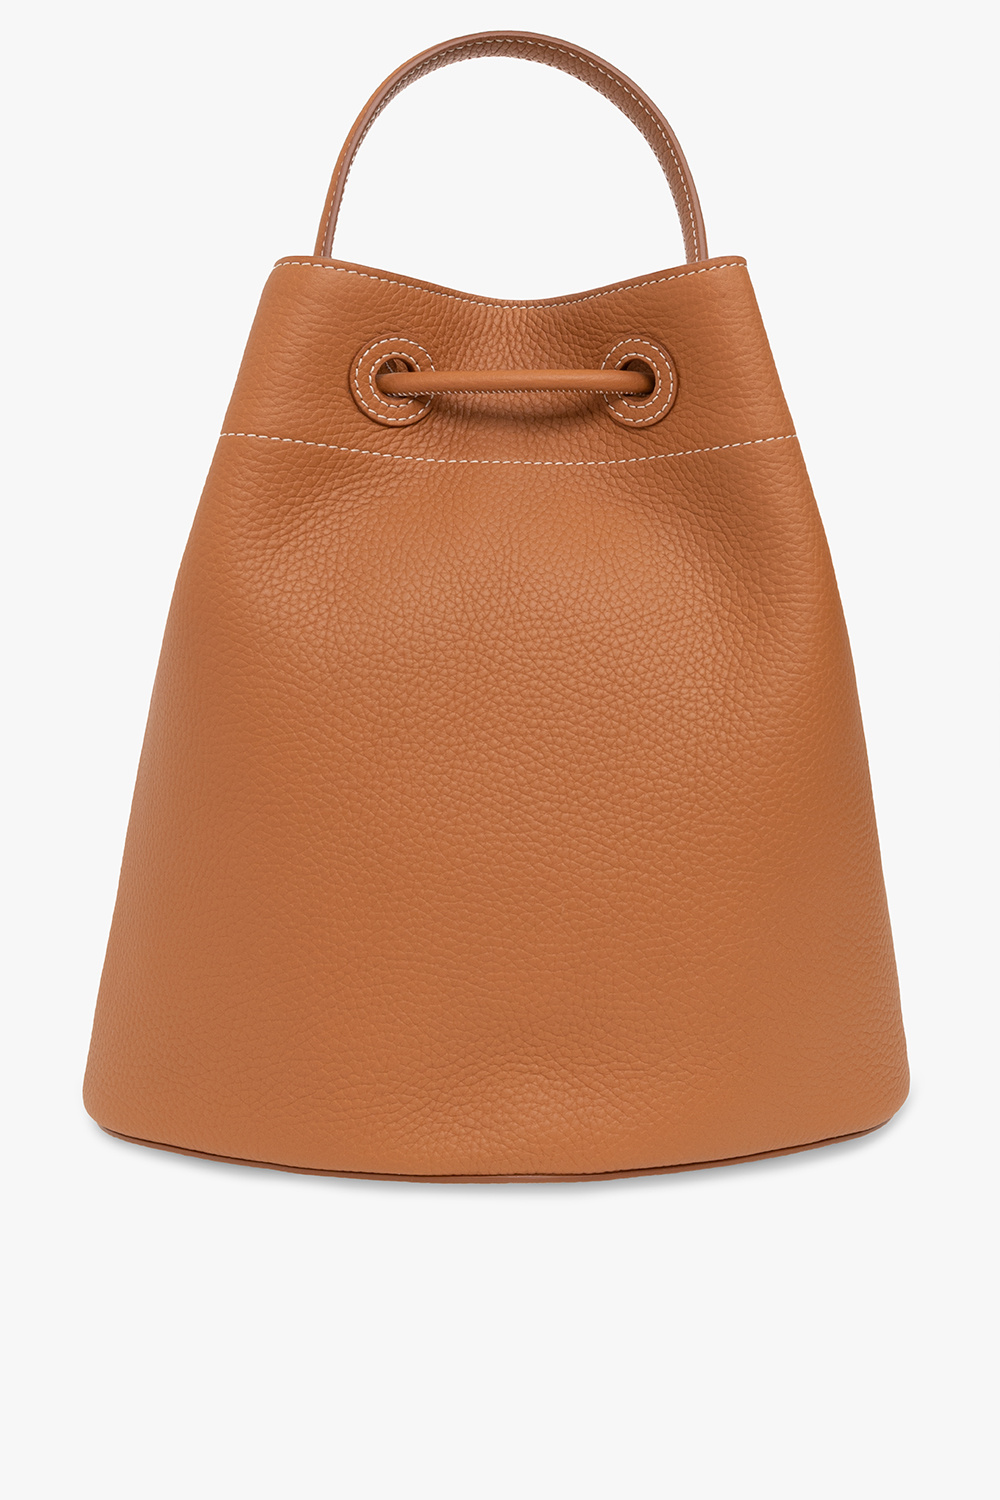 burberry check-pattern Leather bucket bag